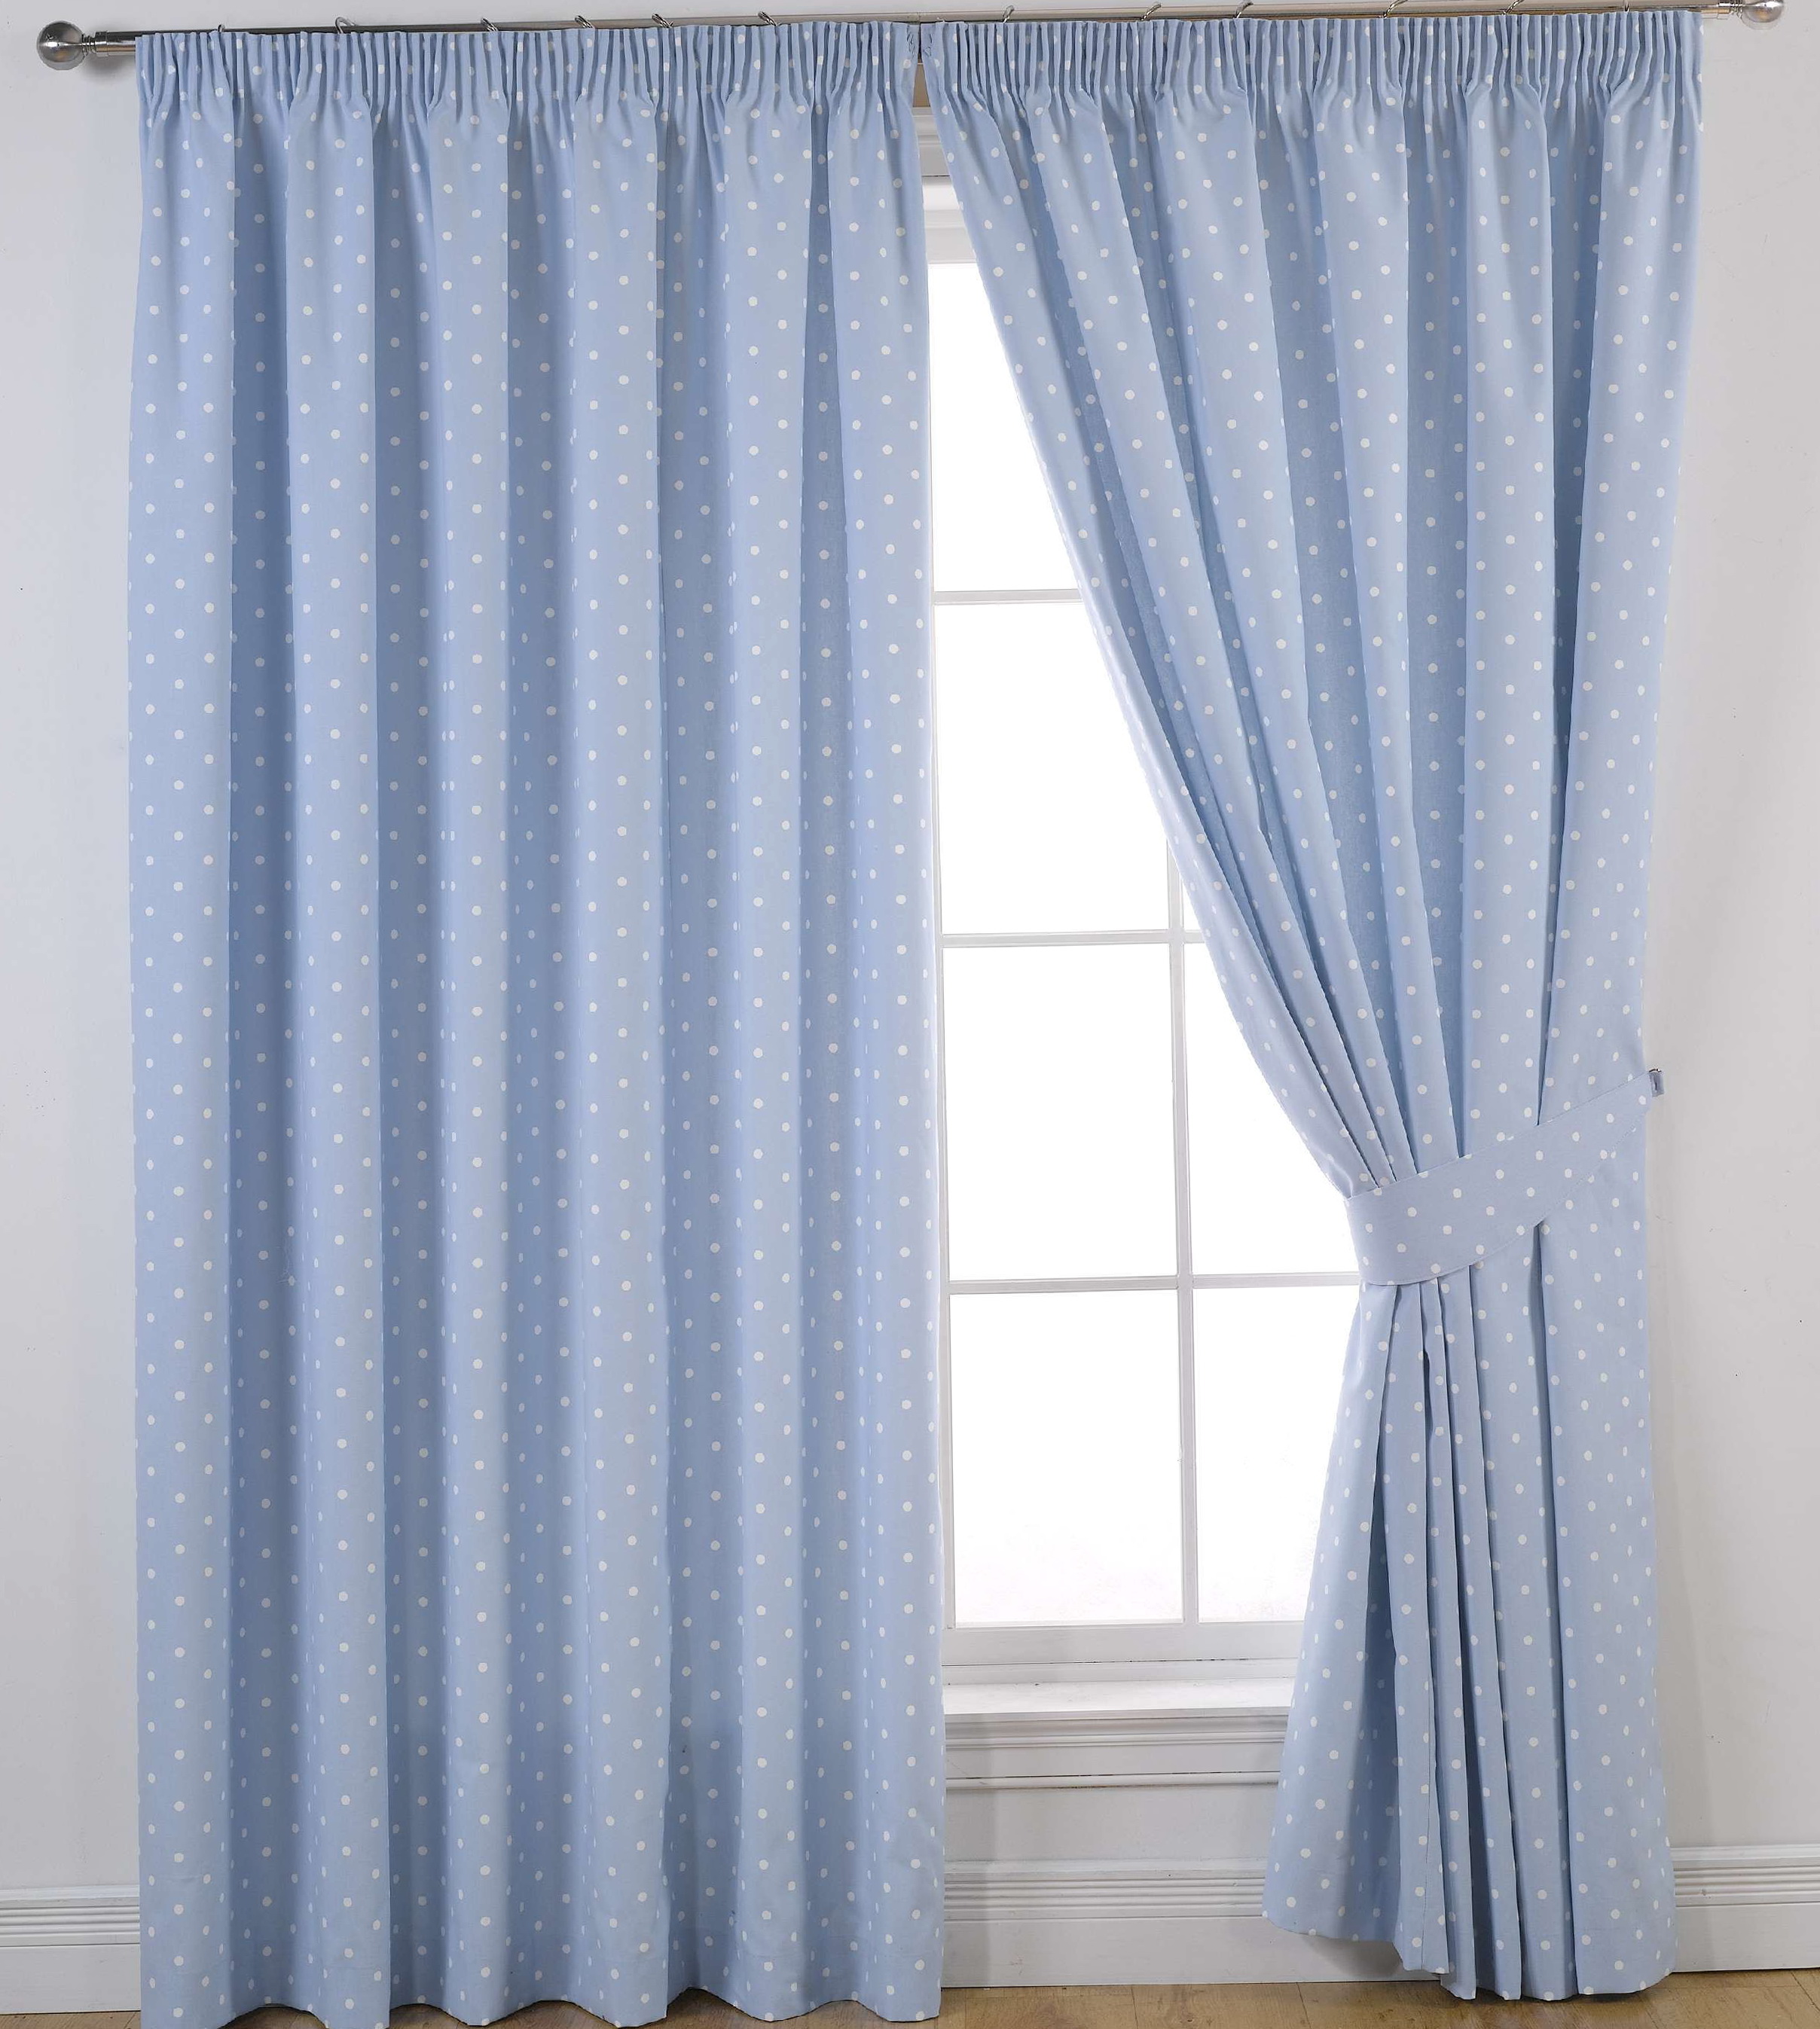 Hotel Blackout Curtains Overstock | Home Design Ideas